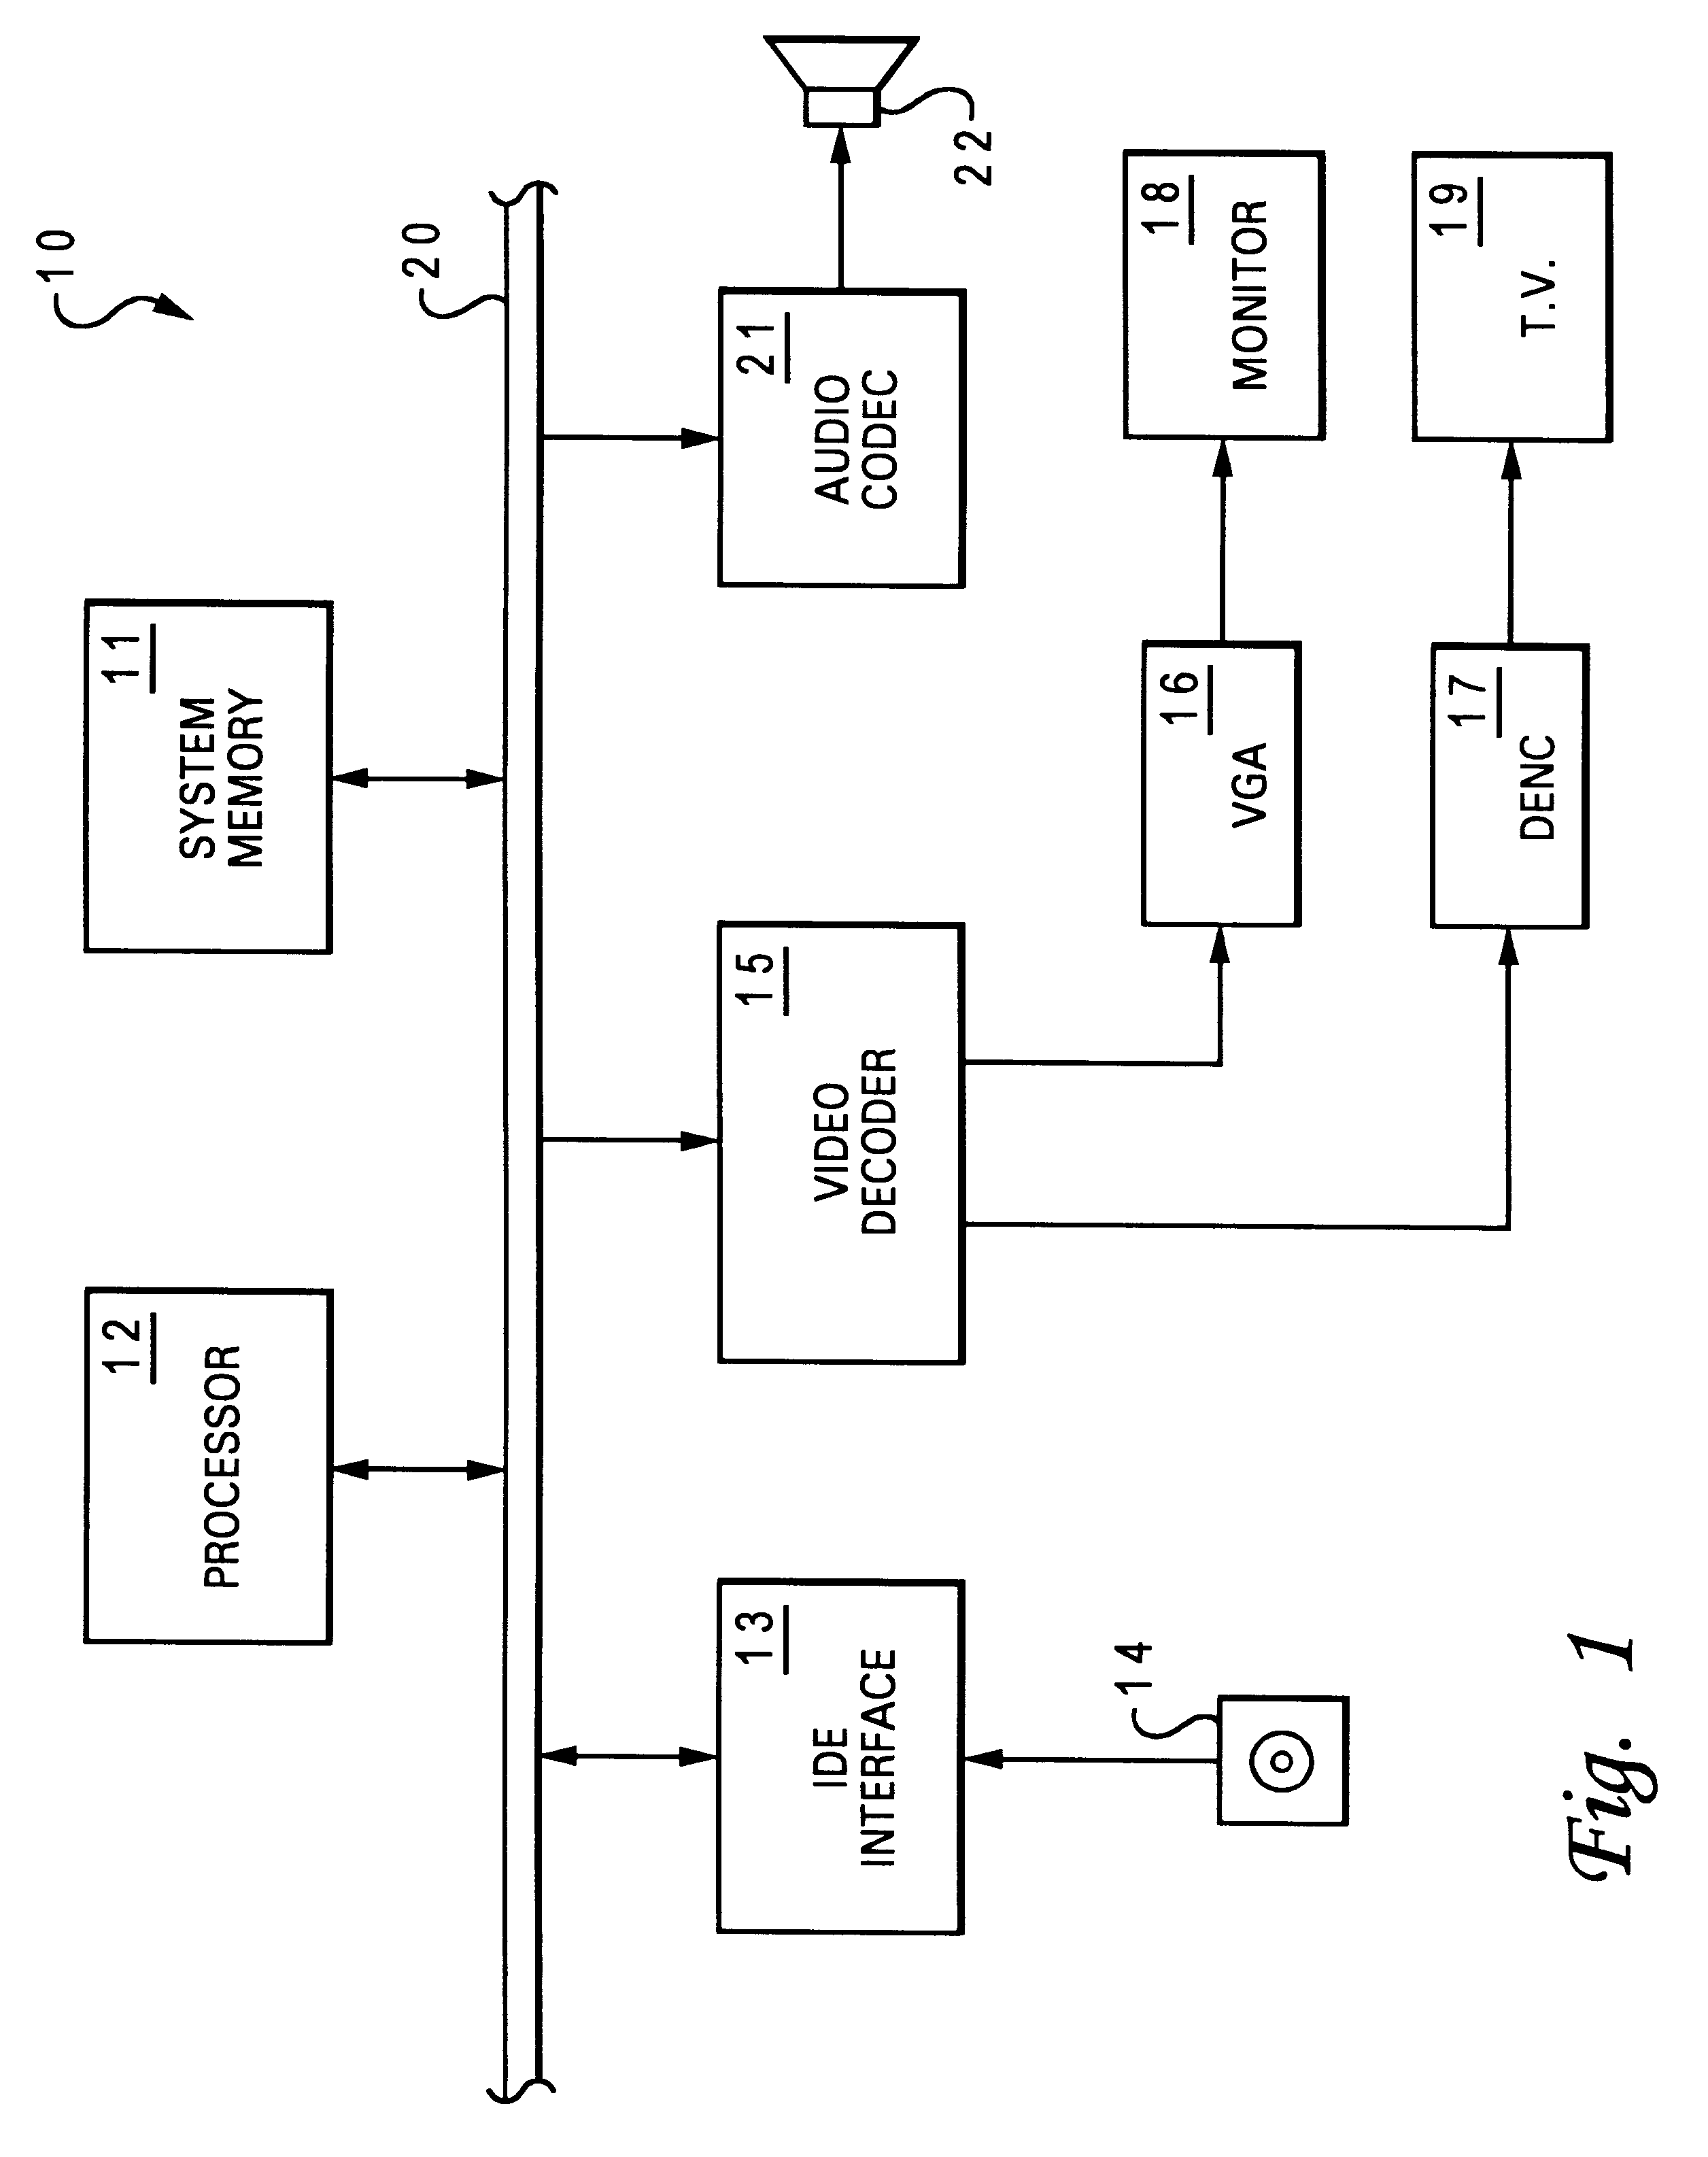 Method and system for selectively and variably attenuating audio data